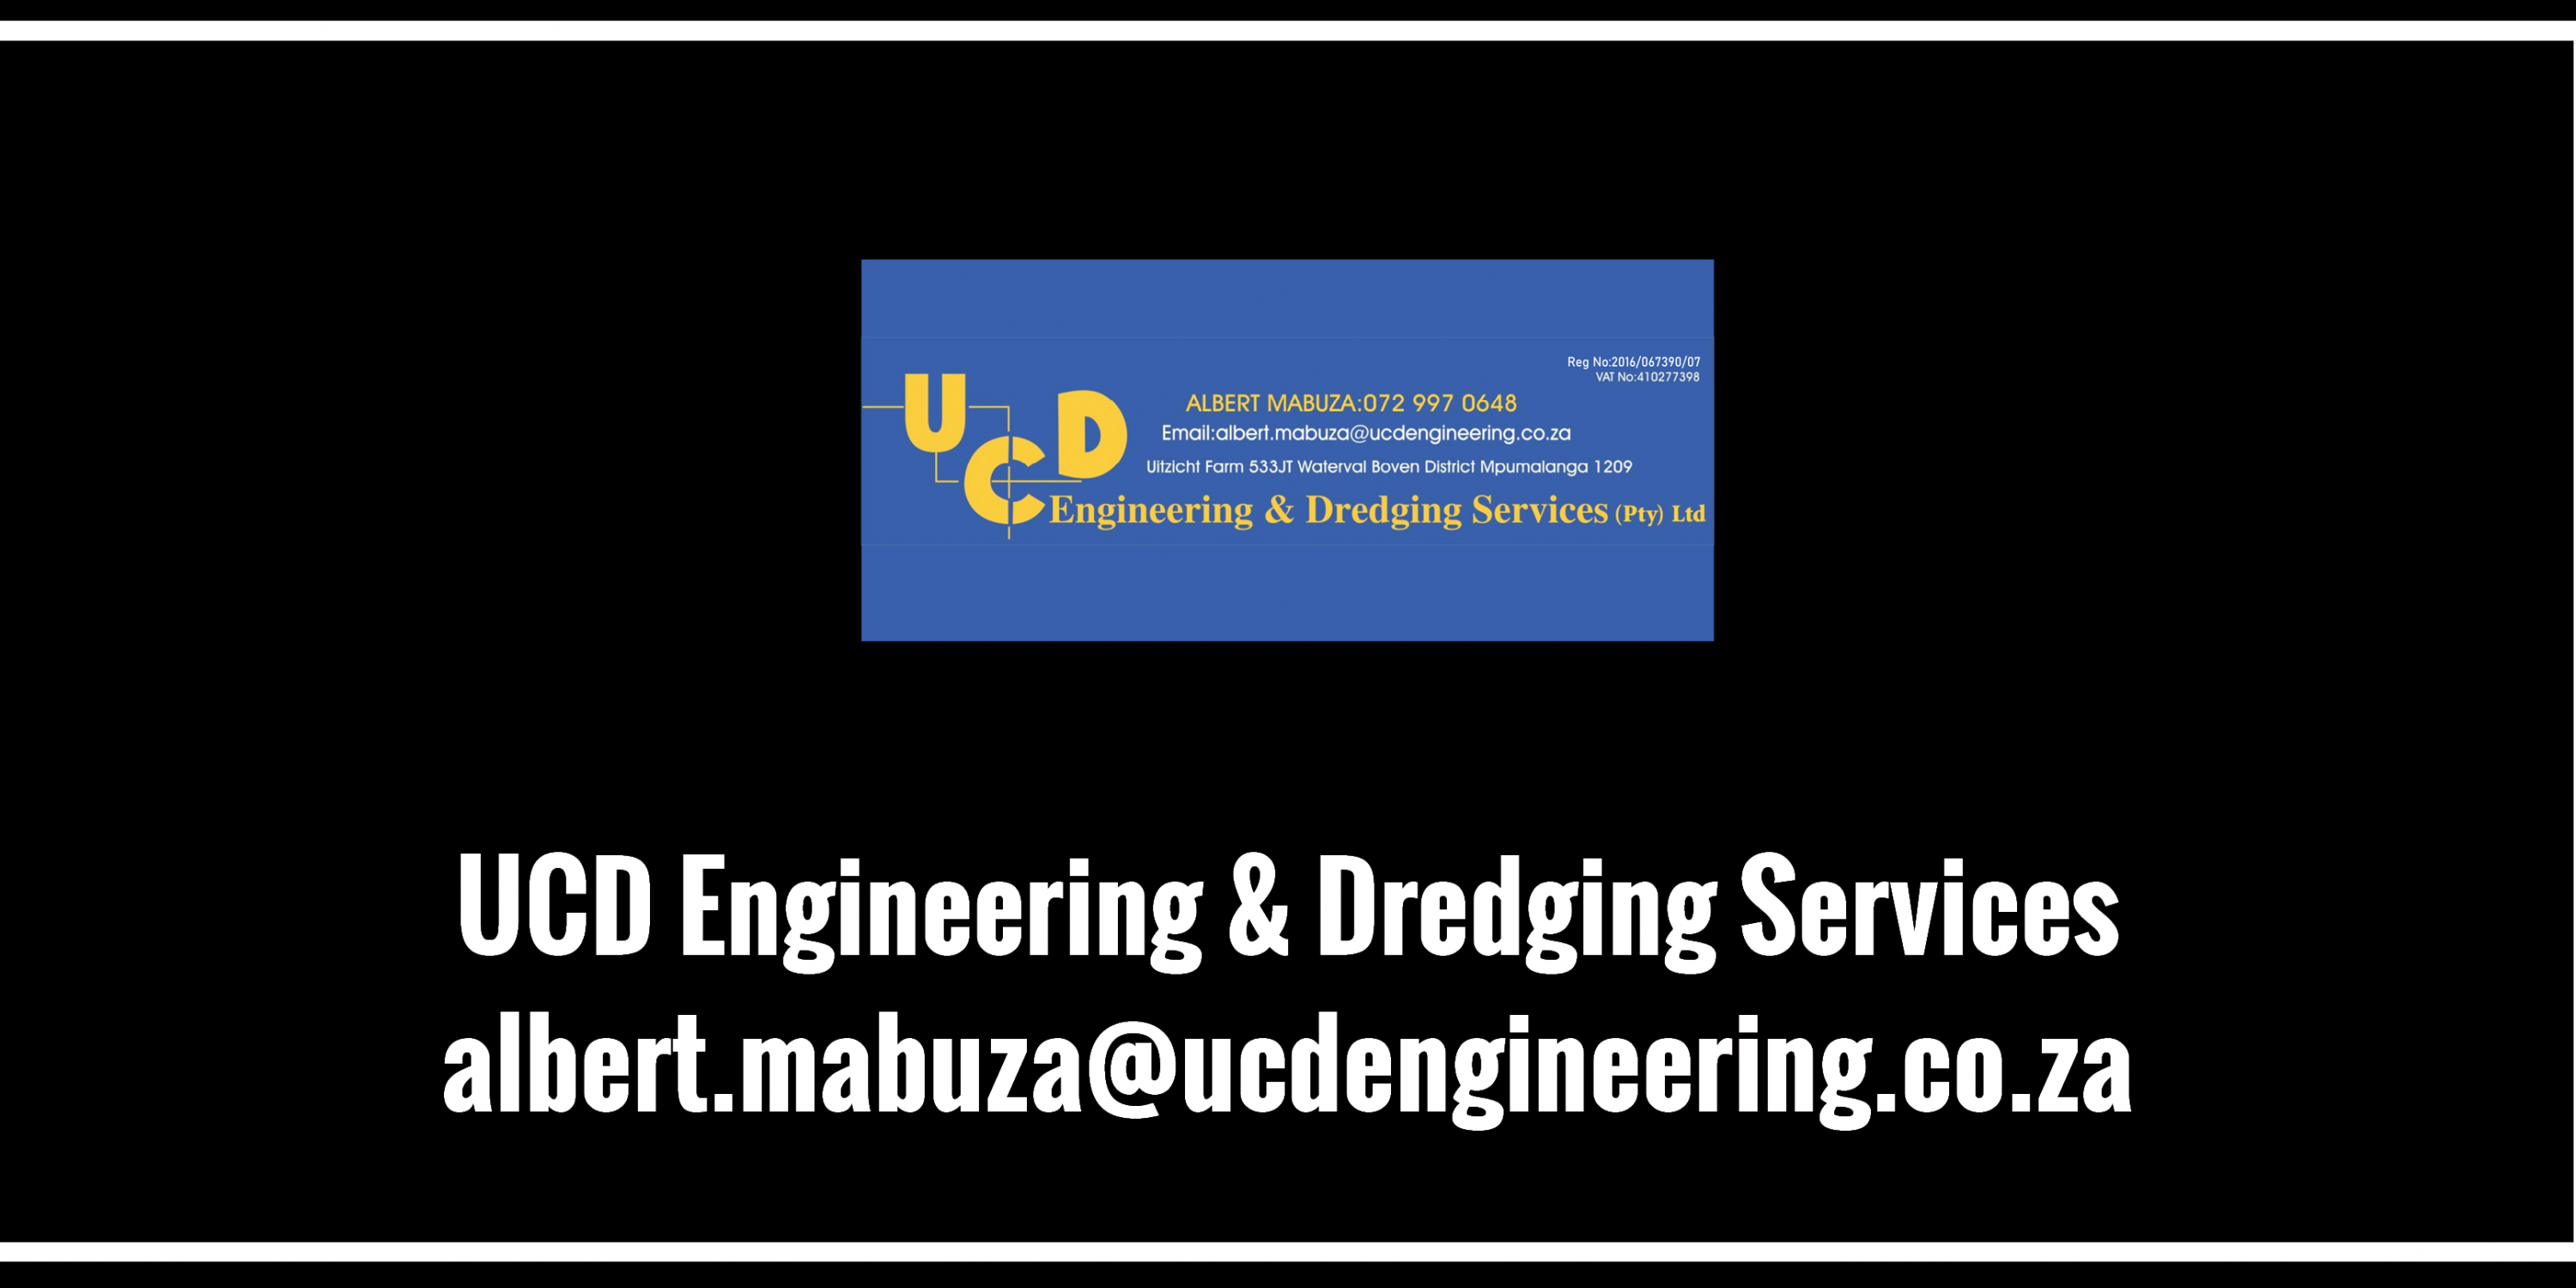 UCD Engineering & Dredging Services